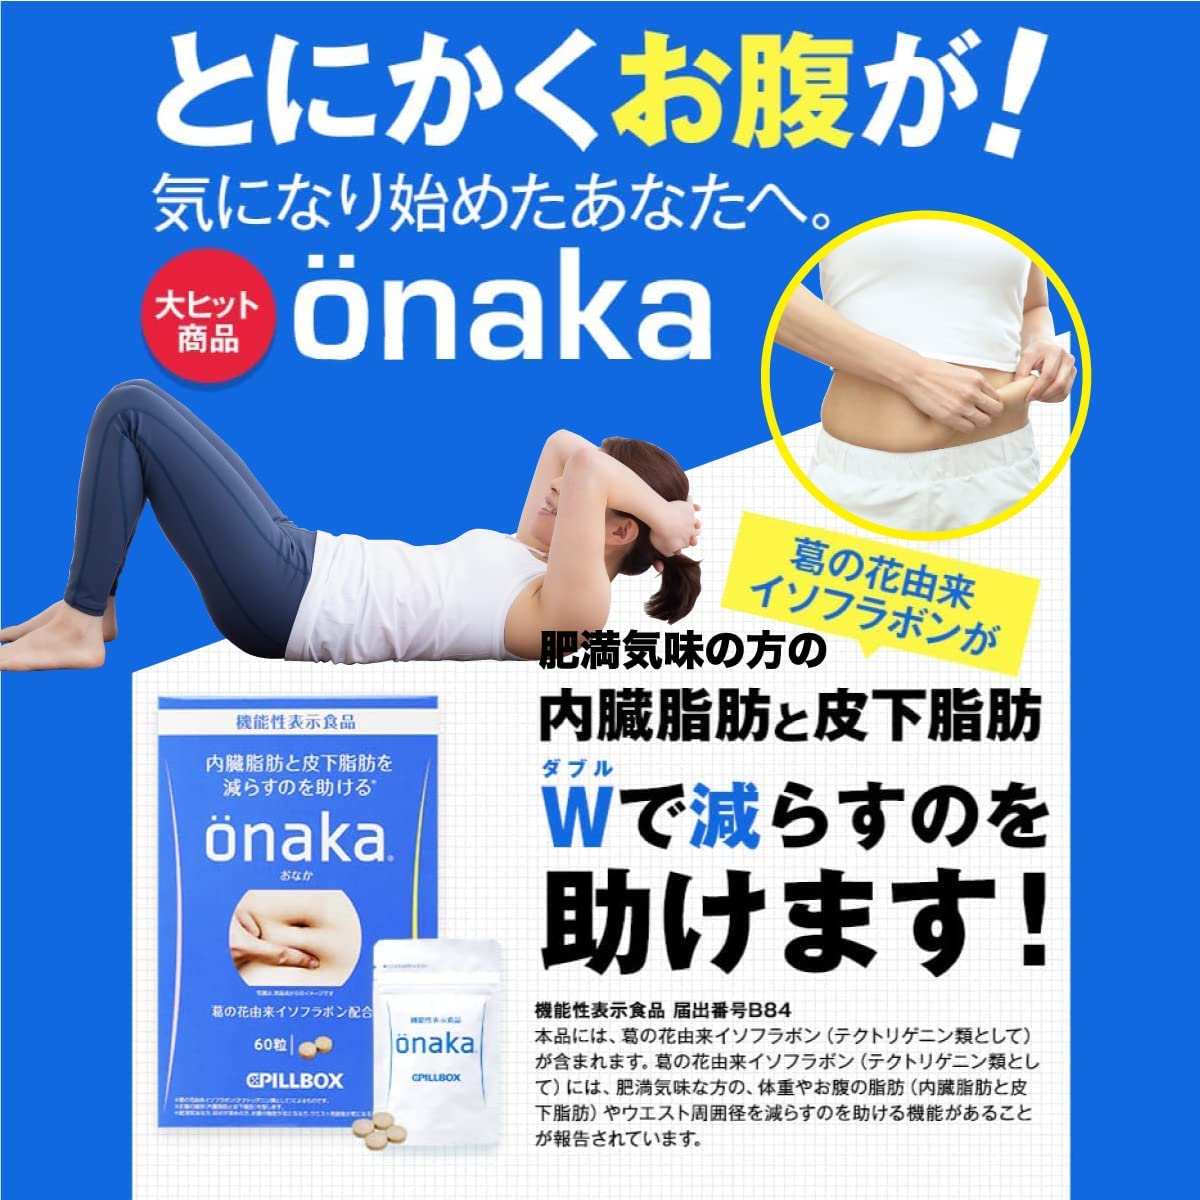 Pillbox onaka [Food with Functional Claims] (onaka 30 days' worth) Fat Burning Supplement Strong Diet Female Isoflavones derived from kudzu flower help reduce visceral fat and subcutaneous fat Food supplement with functional claims 